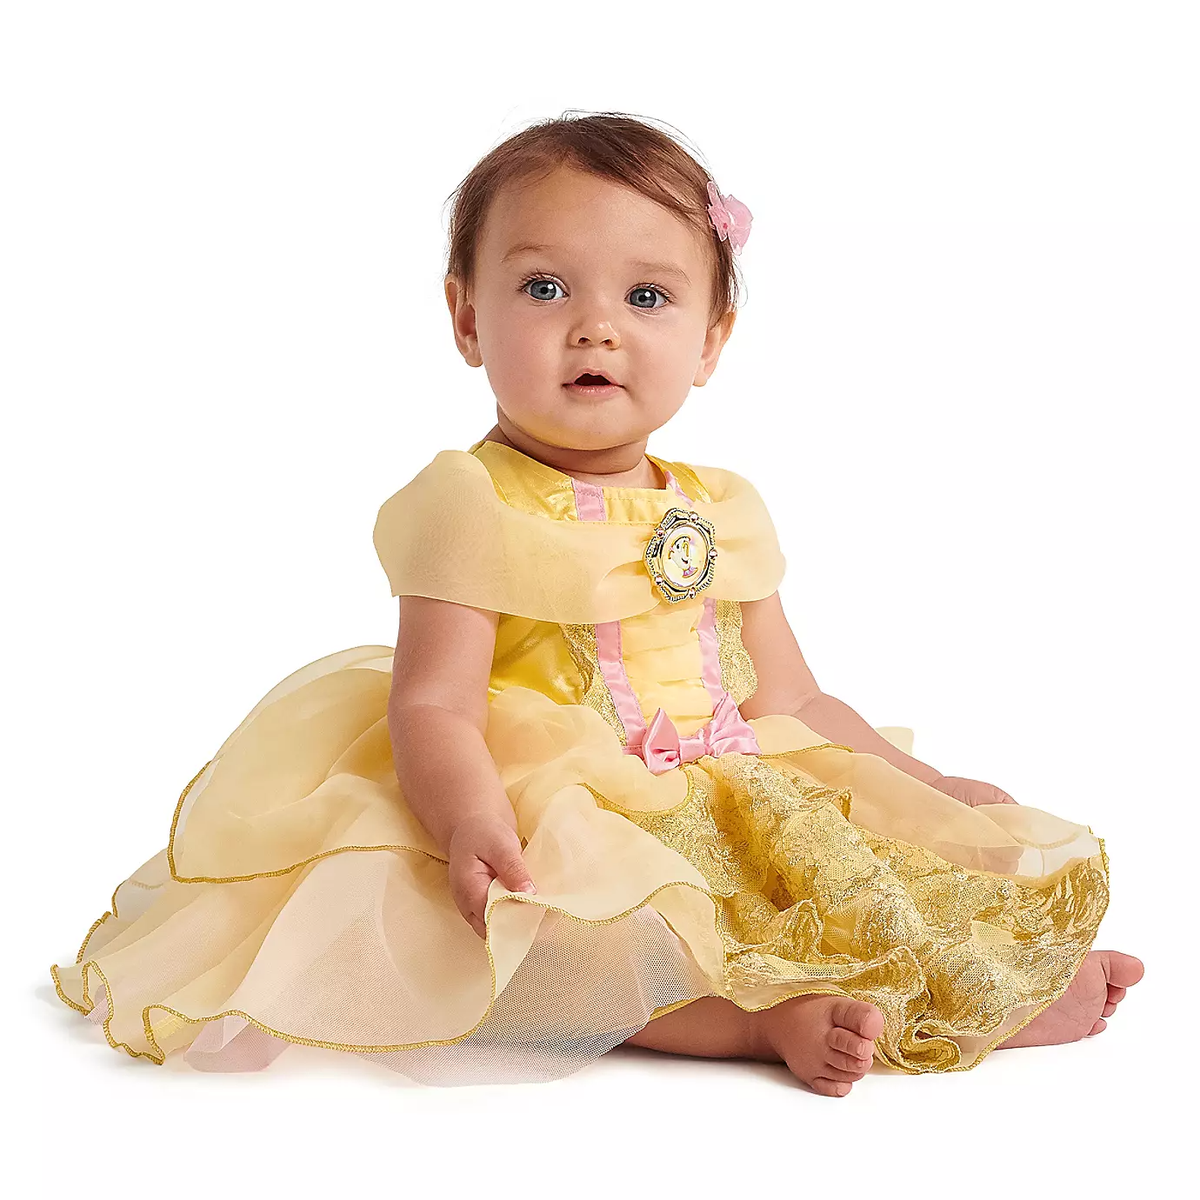 Belle Costume for Baby from Beauty and the Beast